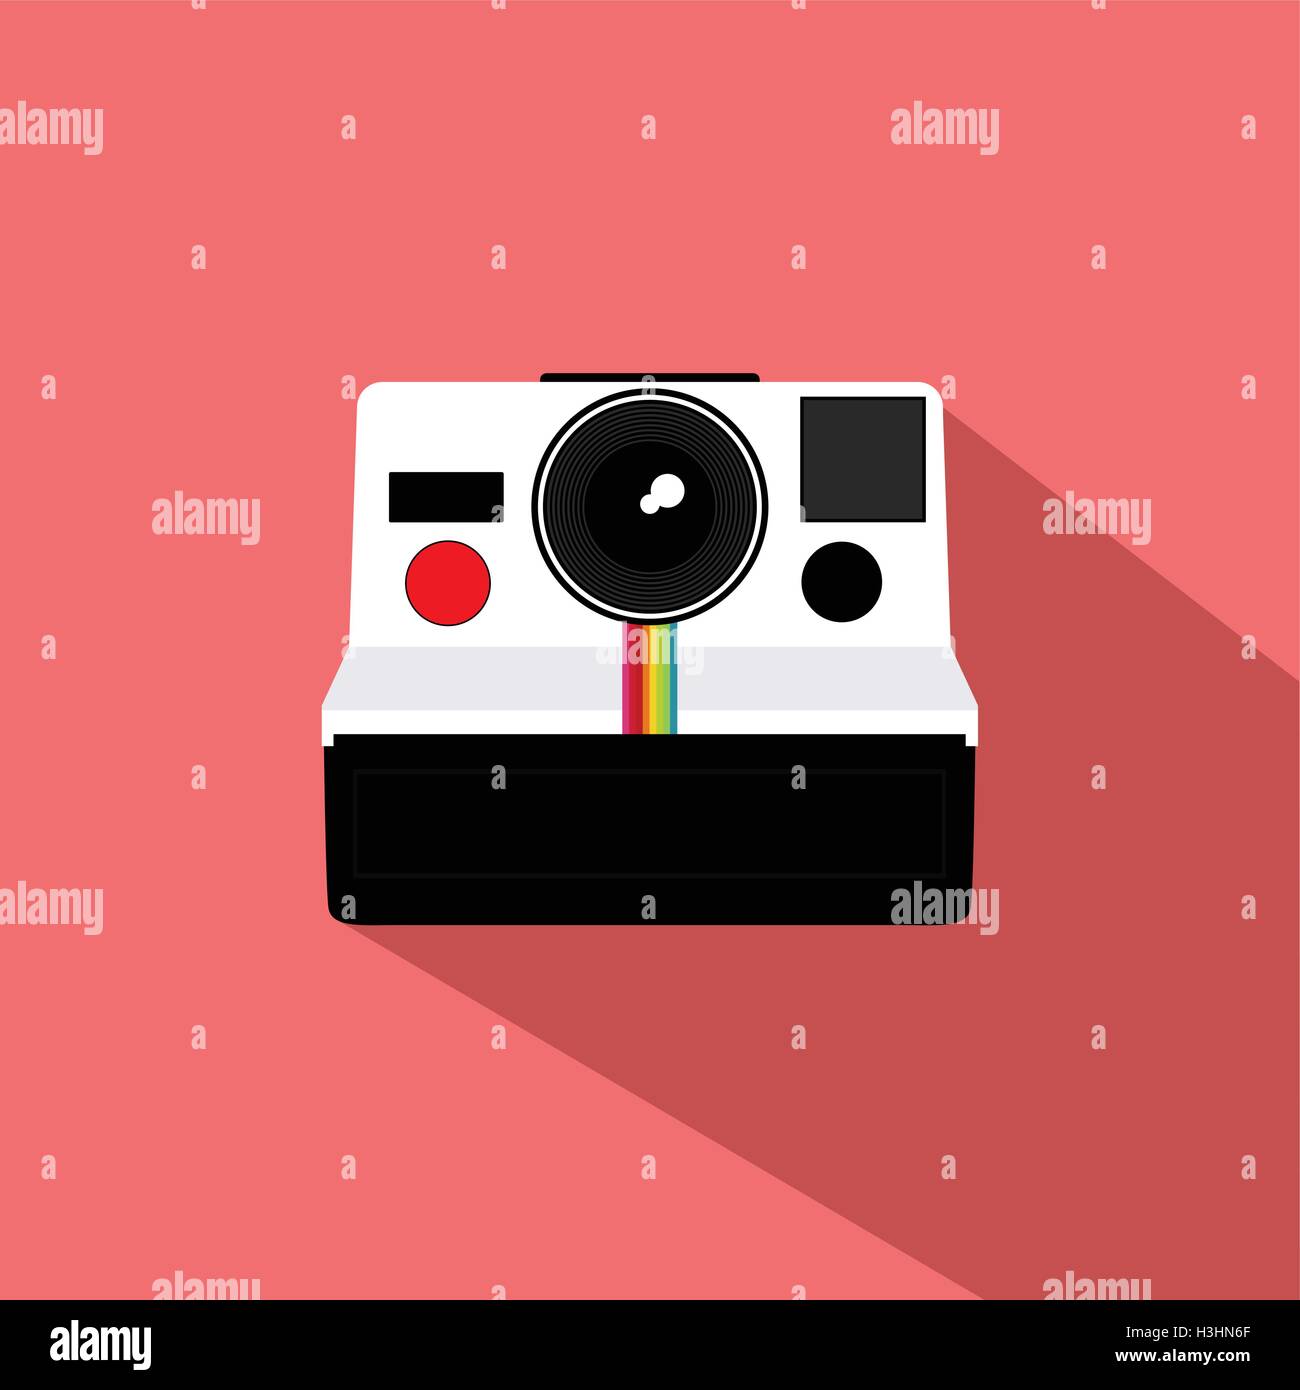 Polaroid Print High Resolution Stock Photography and Images - Alamy